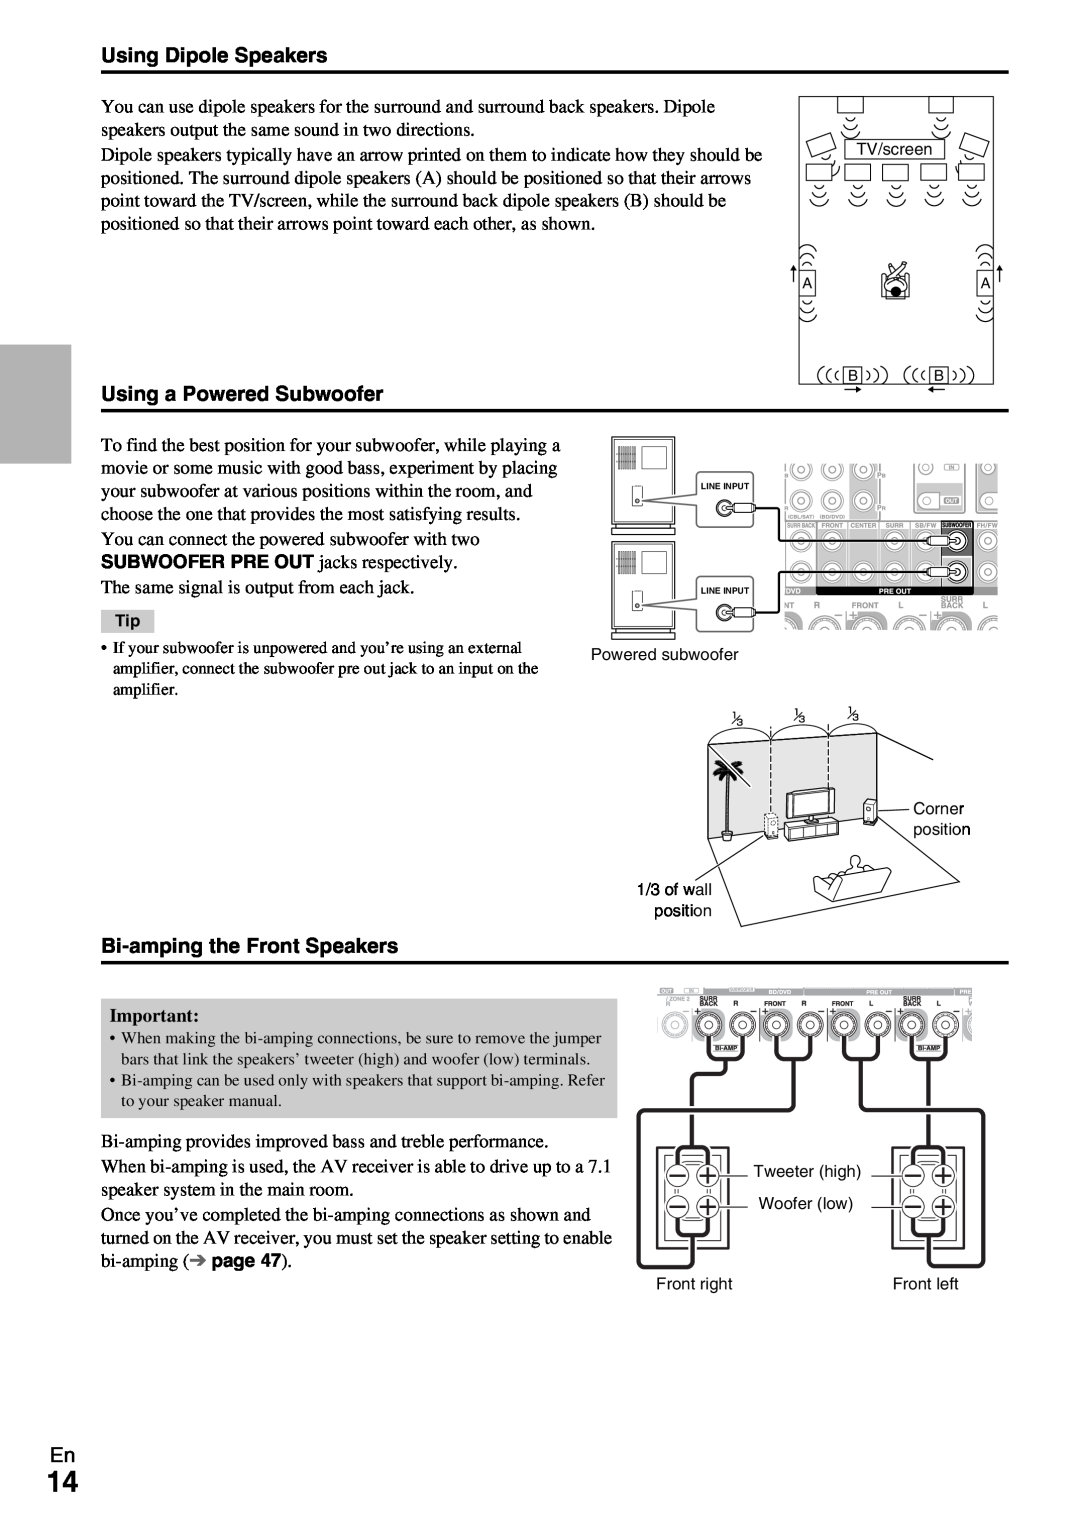 Onkyo TX-NR1009 instruction manual Using Dipole Speakers, Using a Powered Subwoofer, Bi-ampingthe Front Speakers 